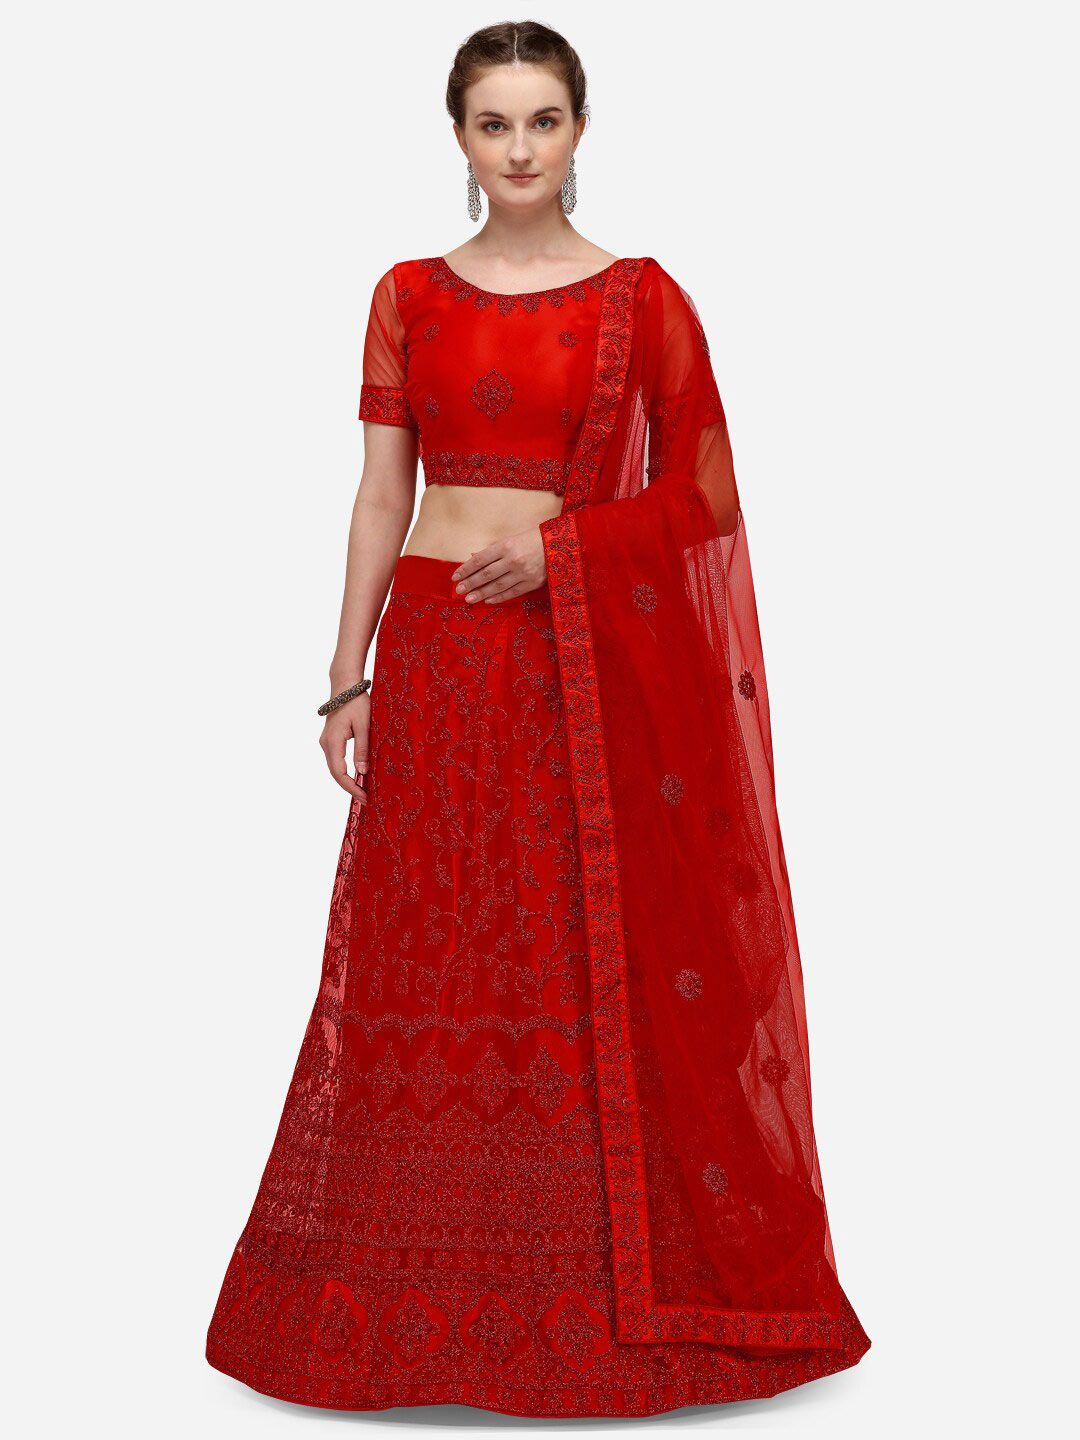 Netram Red Embroidered Semi-Stitched Lehenga & Unstitched Blouse With Dupatta Price in India